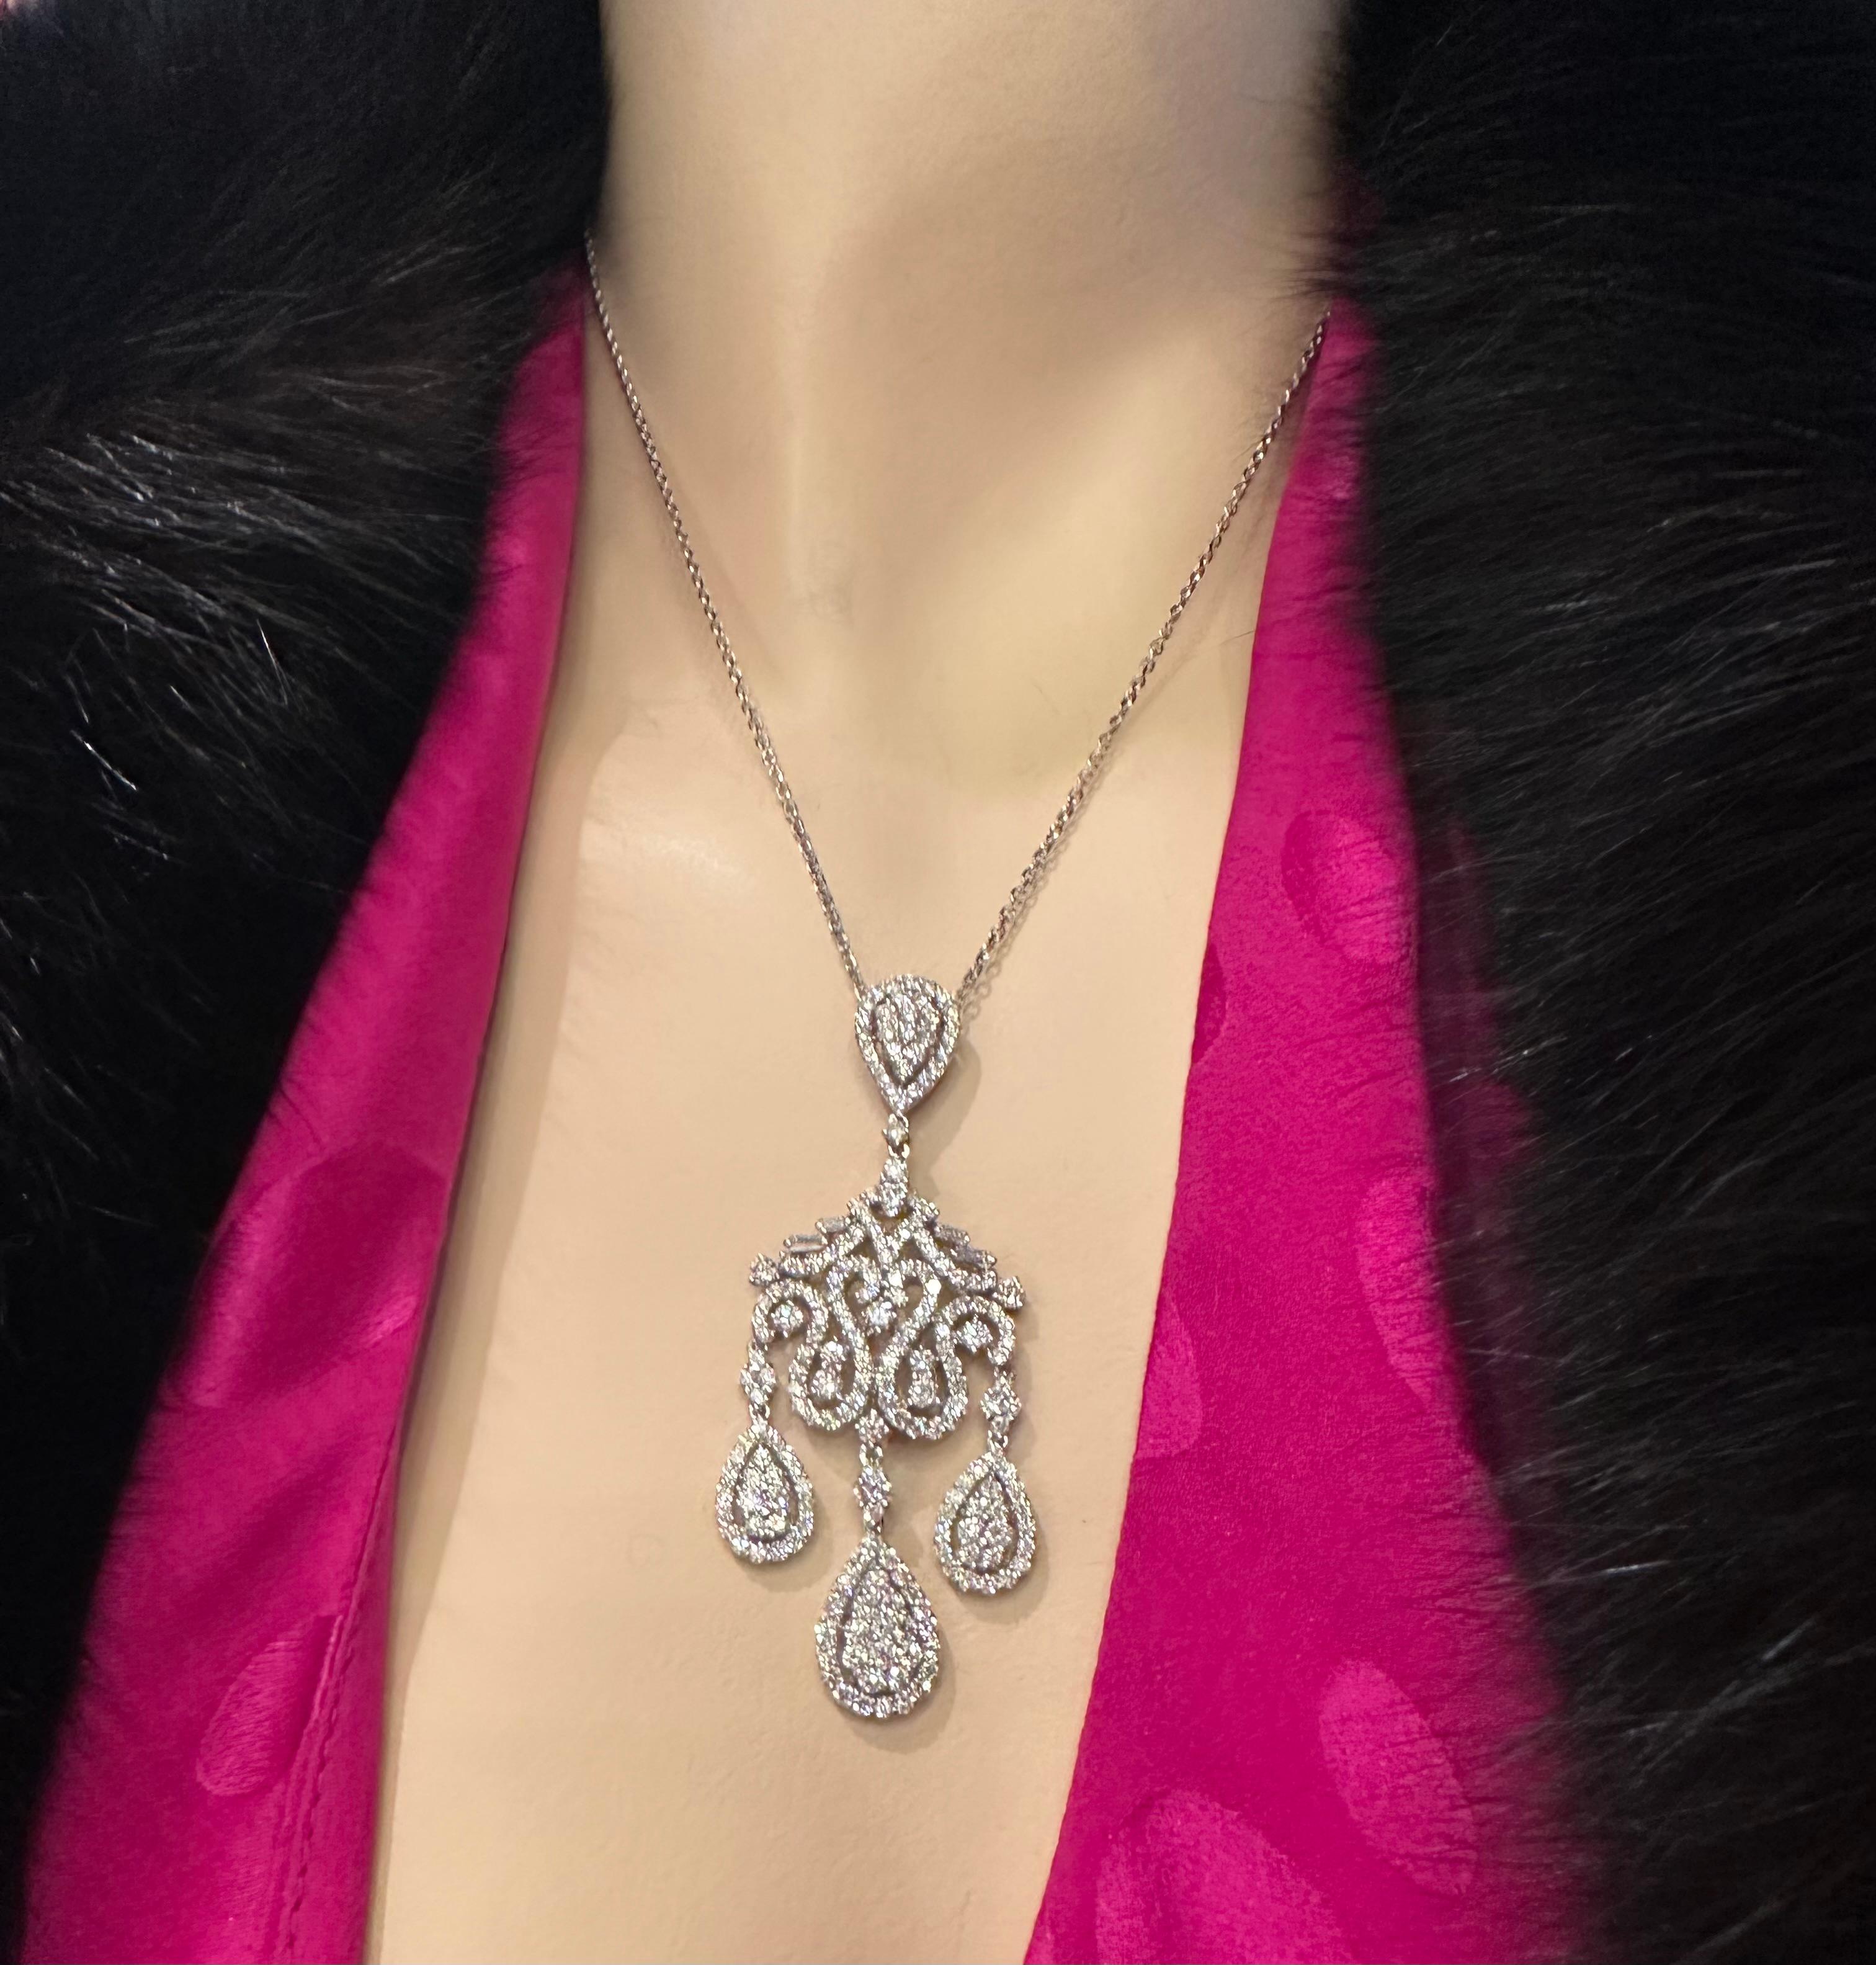 Exquisite ladies 18 karat white gold 9.76 carat diamond chandelier style drop necklace presents a show stopping array of round brilliant and baguette diamonds that sparkle with unparalleled brilliance.  Necklace features a cascading trio of pear